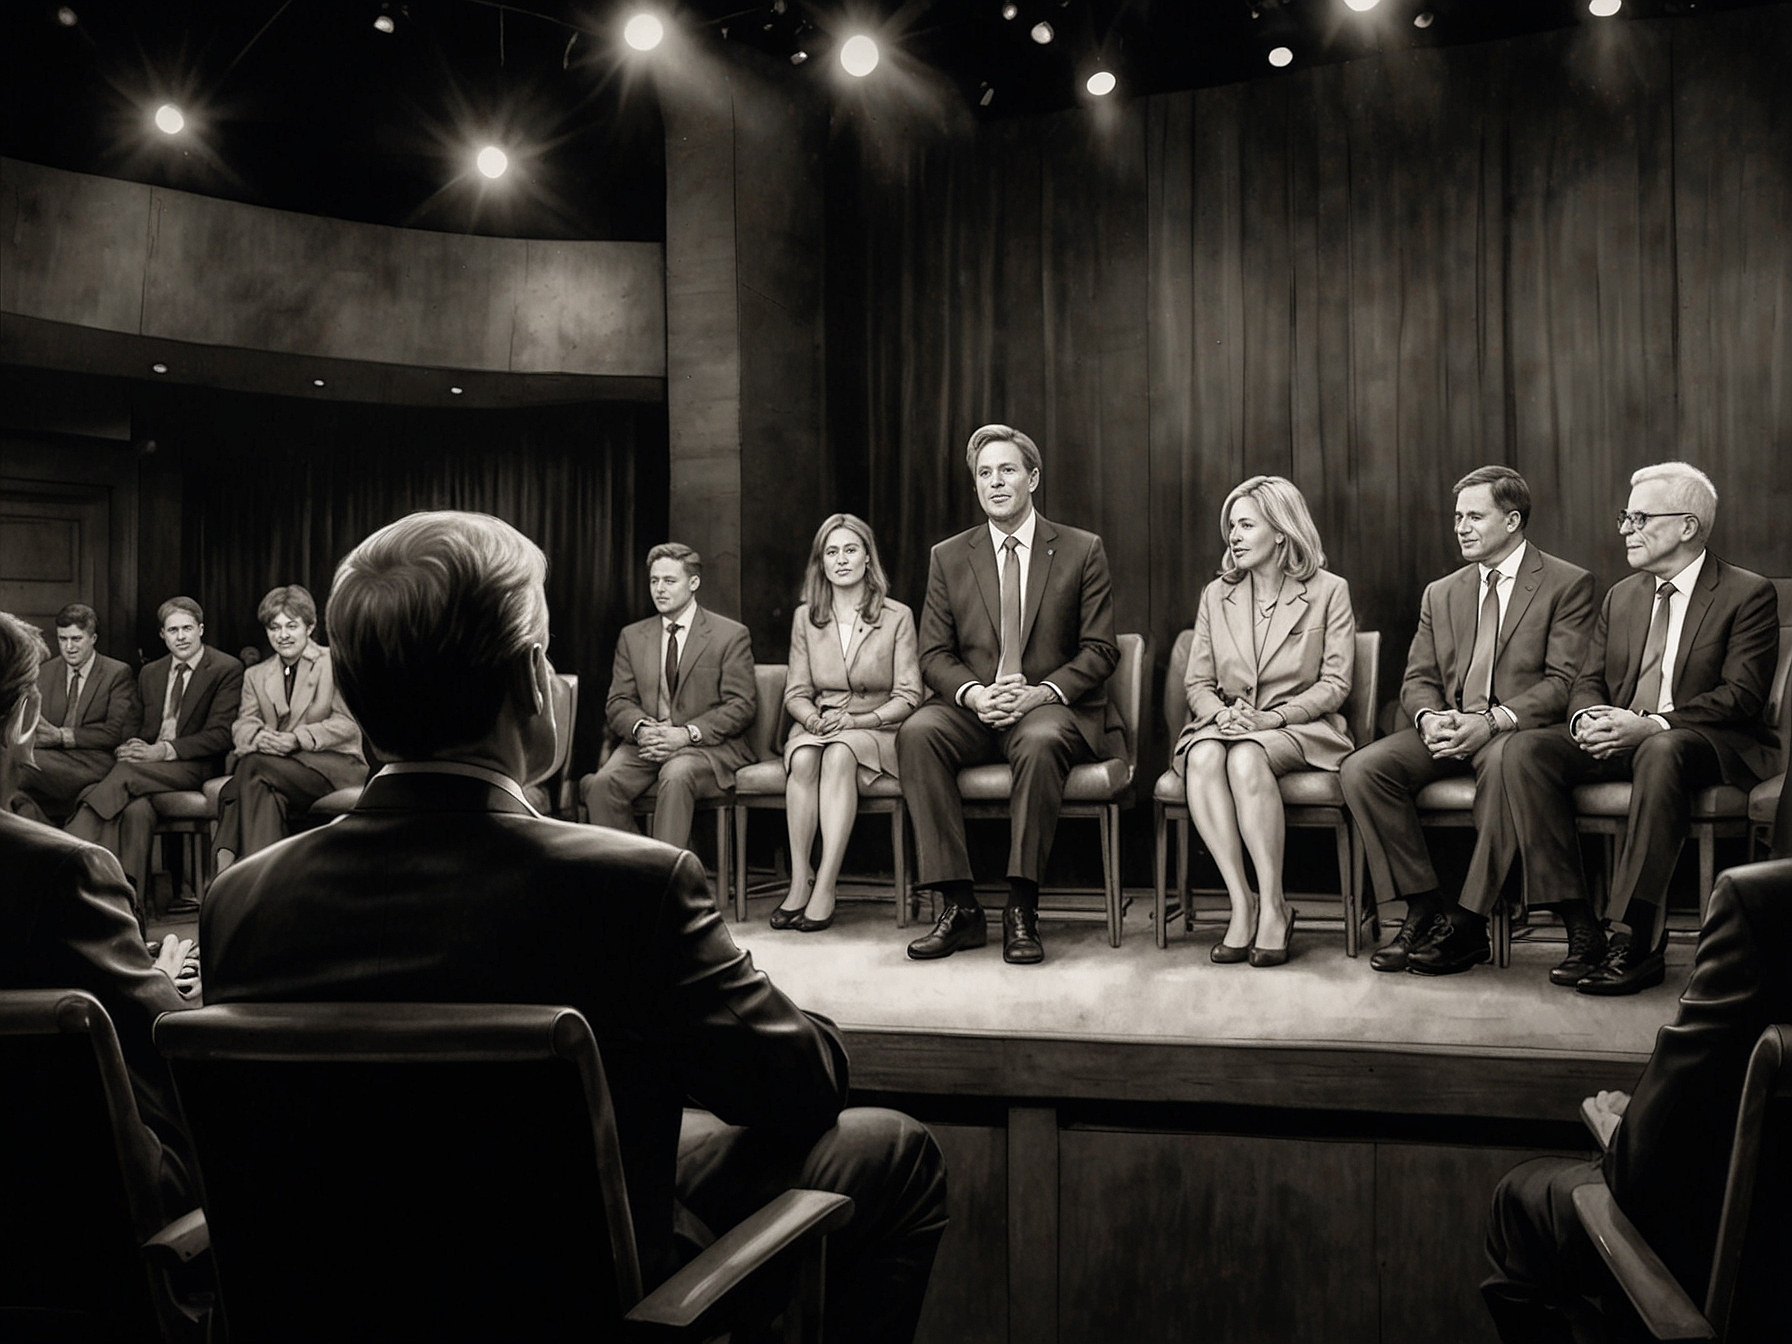 Candidates on stage responding to probing questions from moderators, capturing their expressions and body language, under the keen eyes of a live audience and millions of viewers at home.